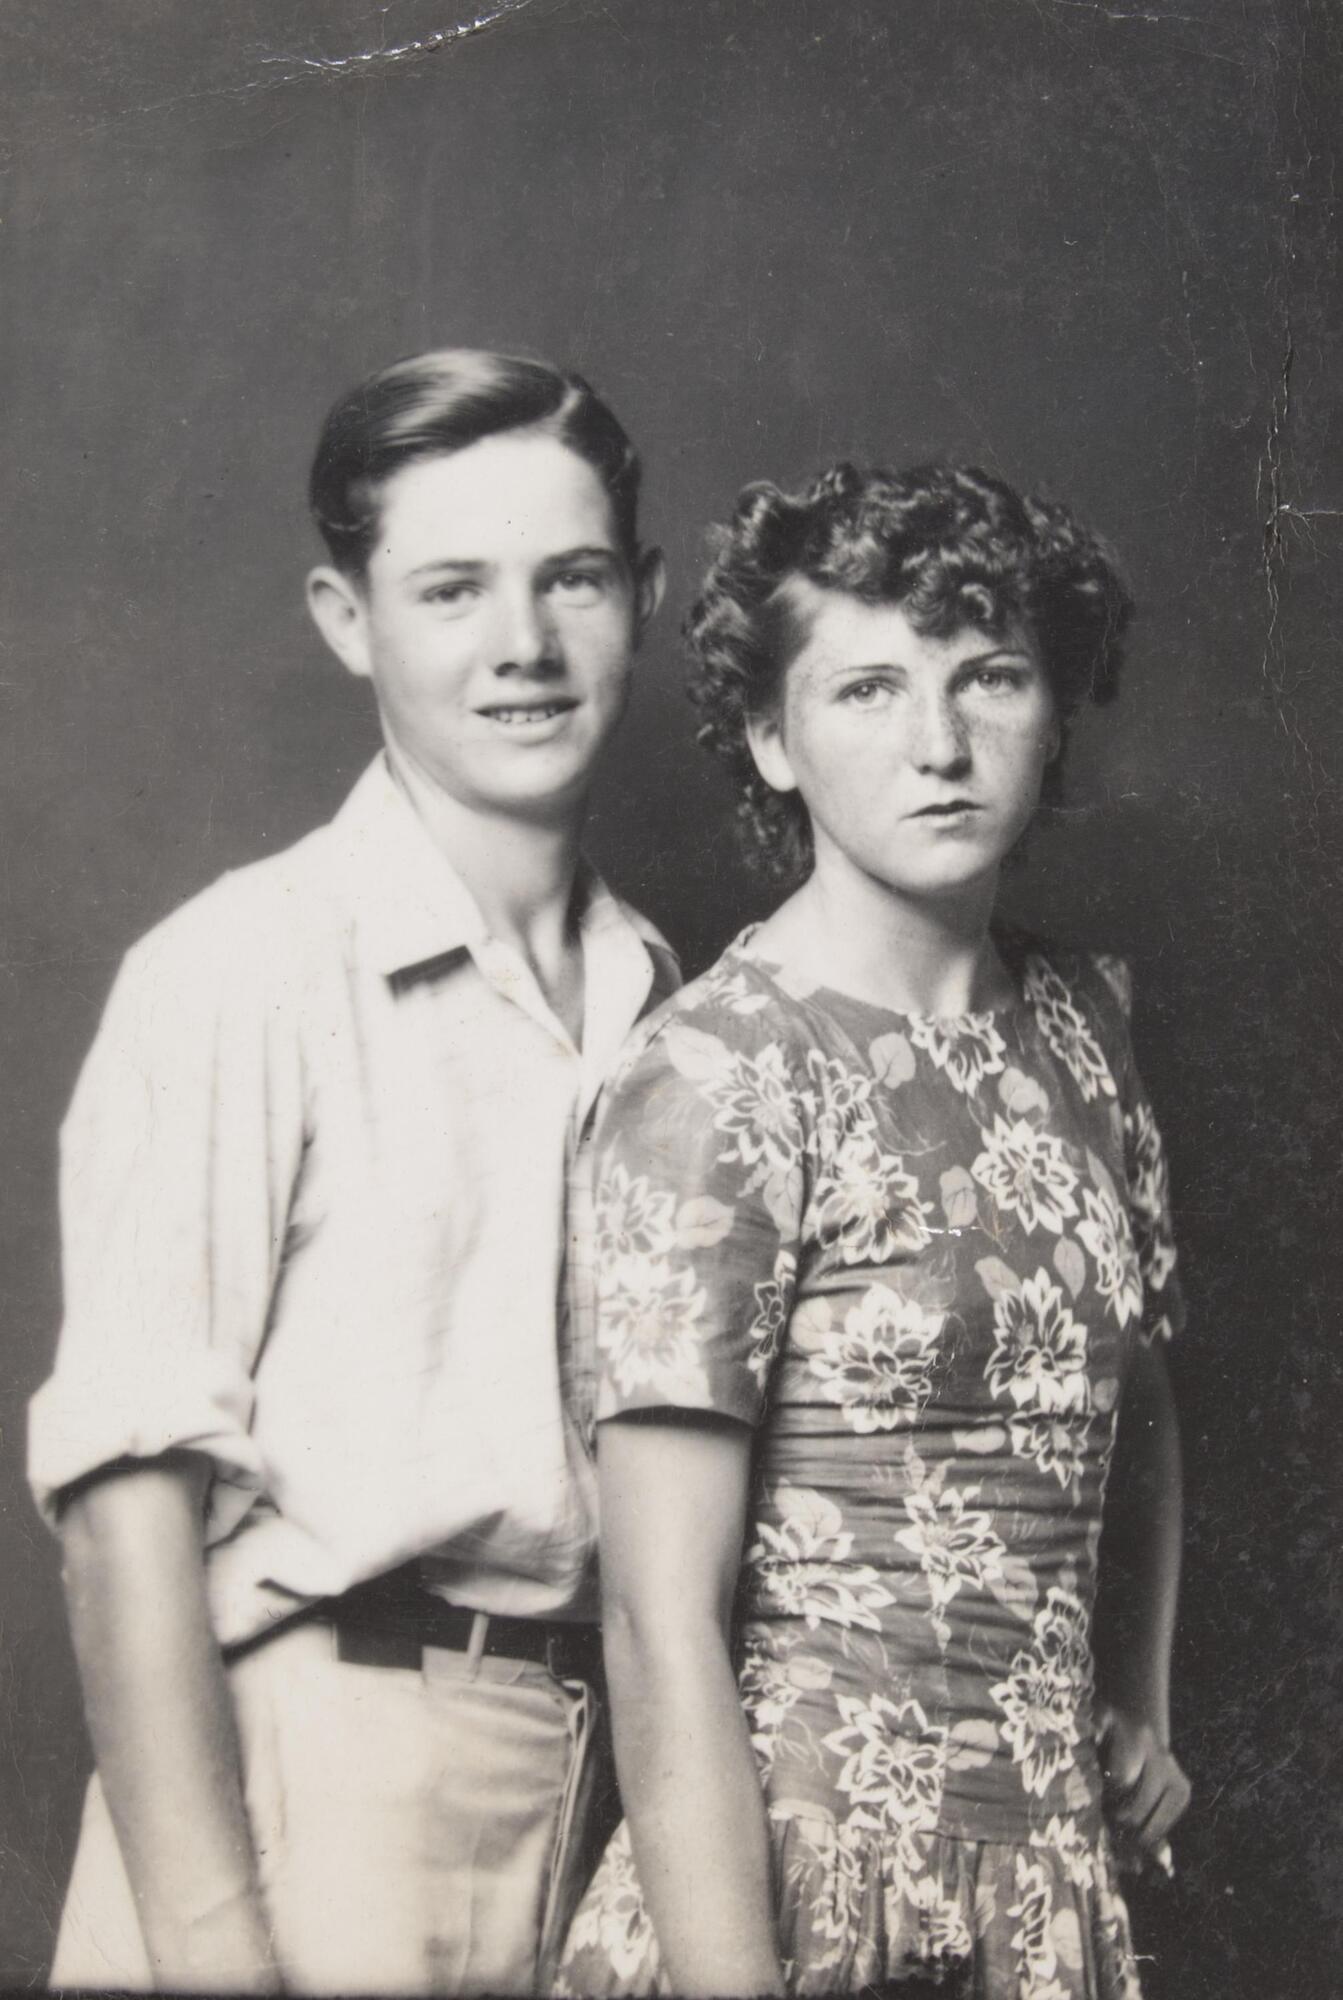 A portrait of a young man and woman standing next to one another. The young man wears a shirt, belt, and trousers. The young woman wears a floral dress.